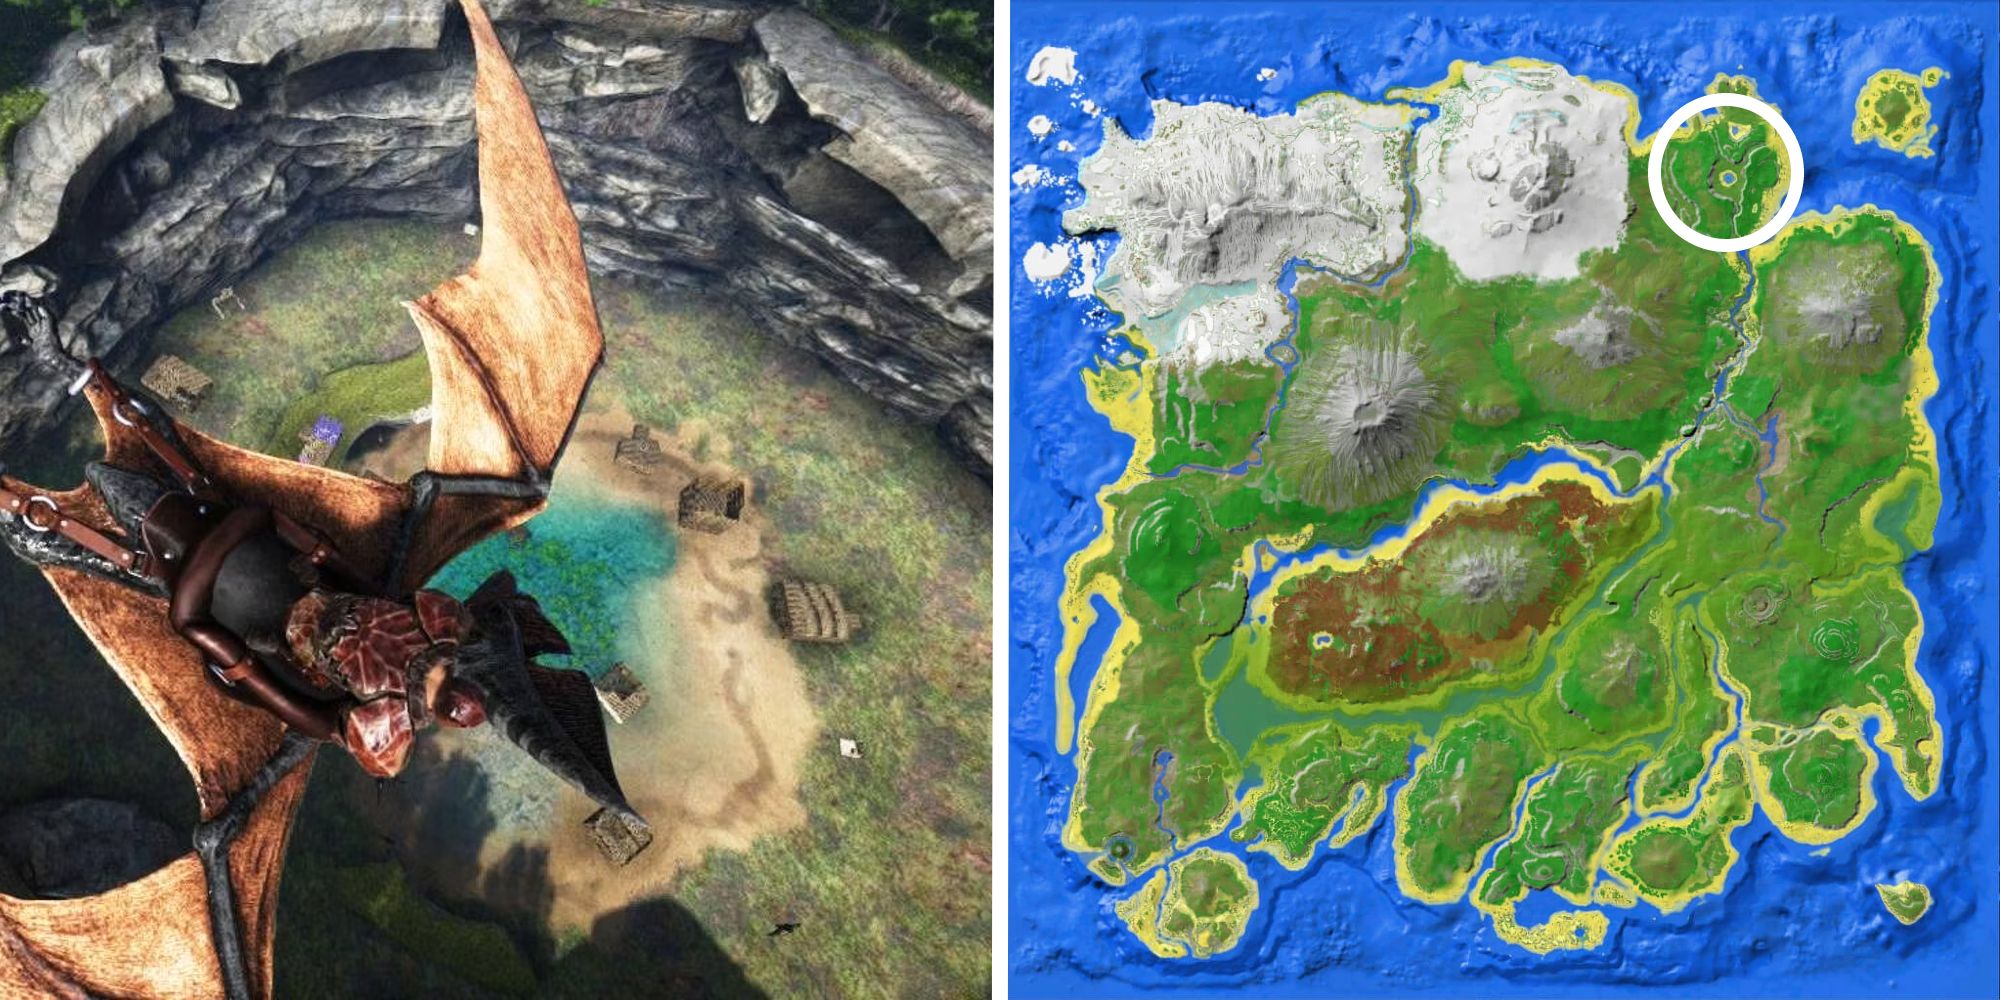 image of player flying over the hidden lake next to image of location on map